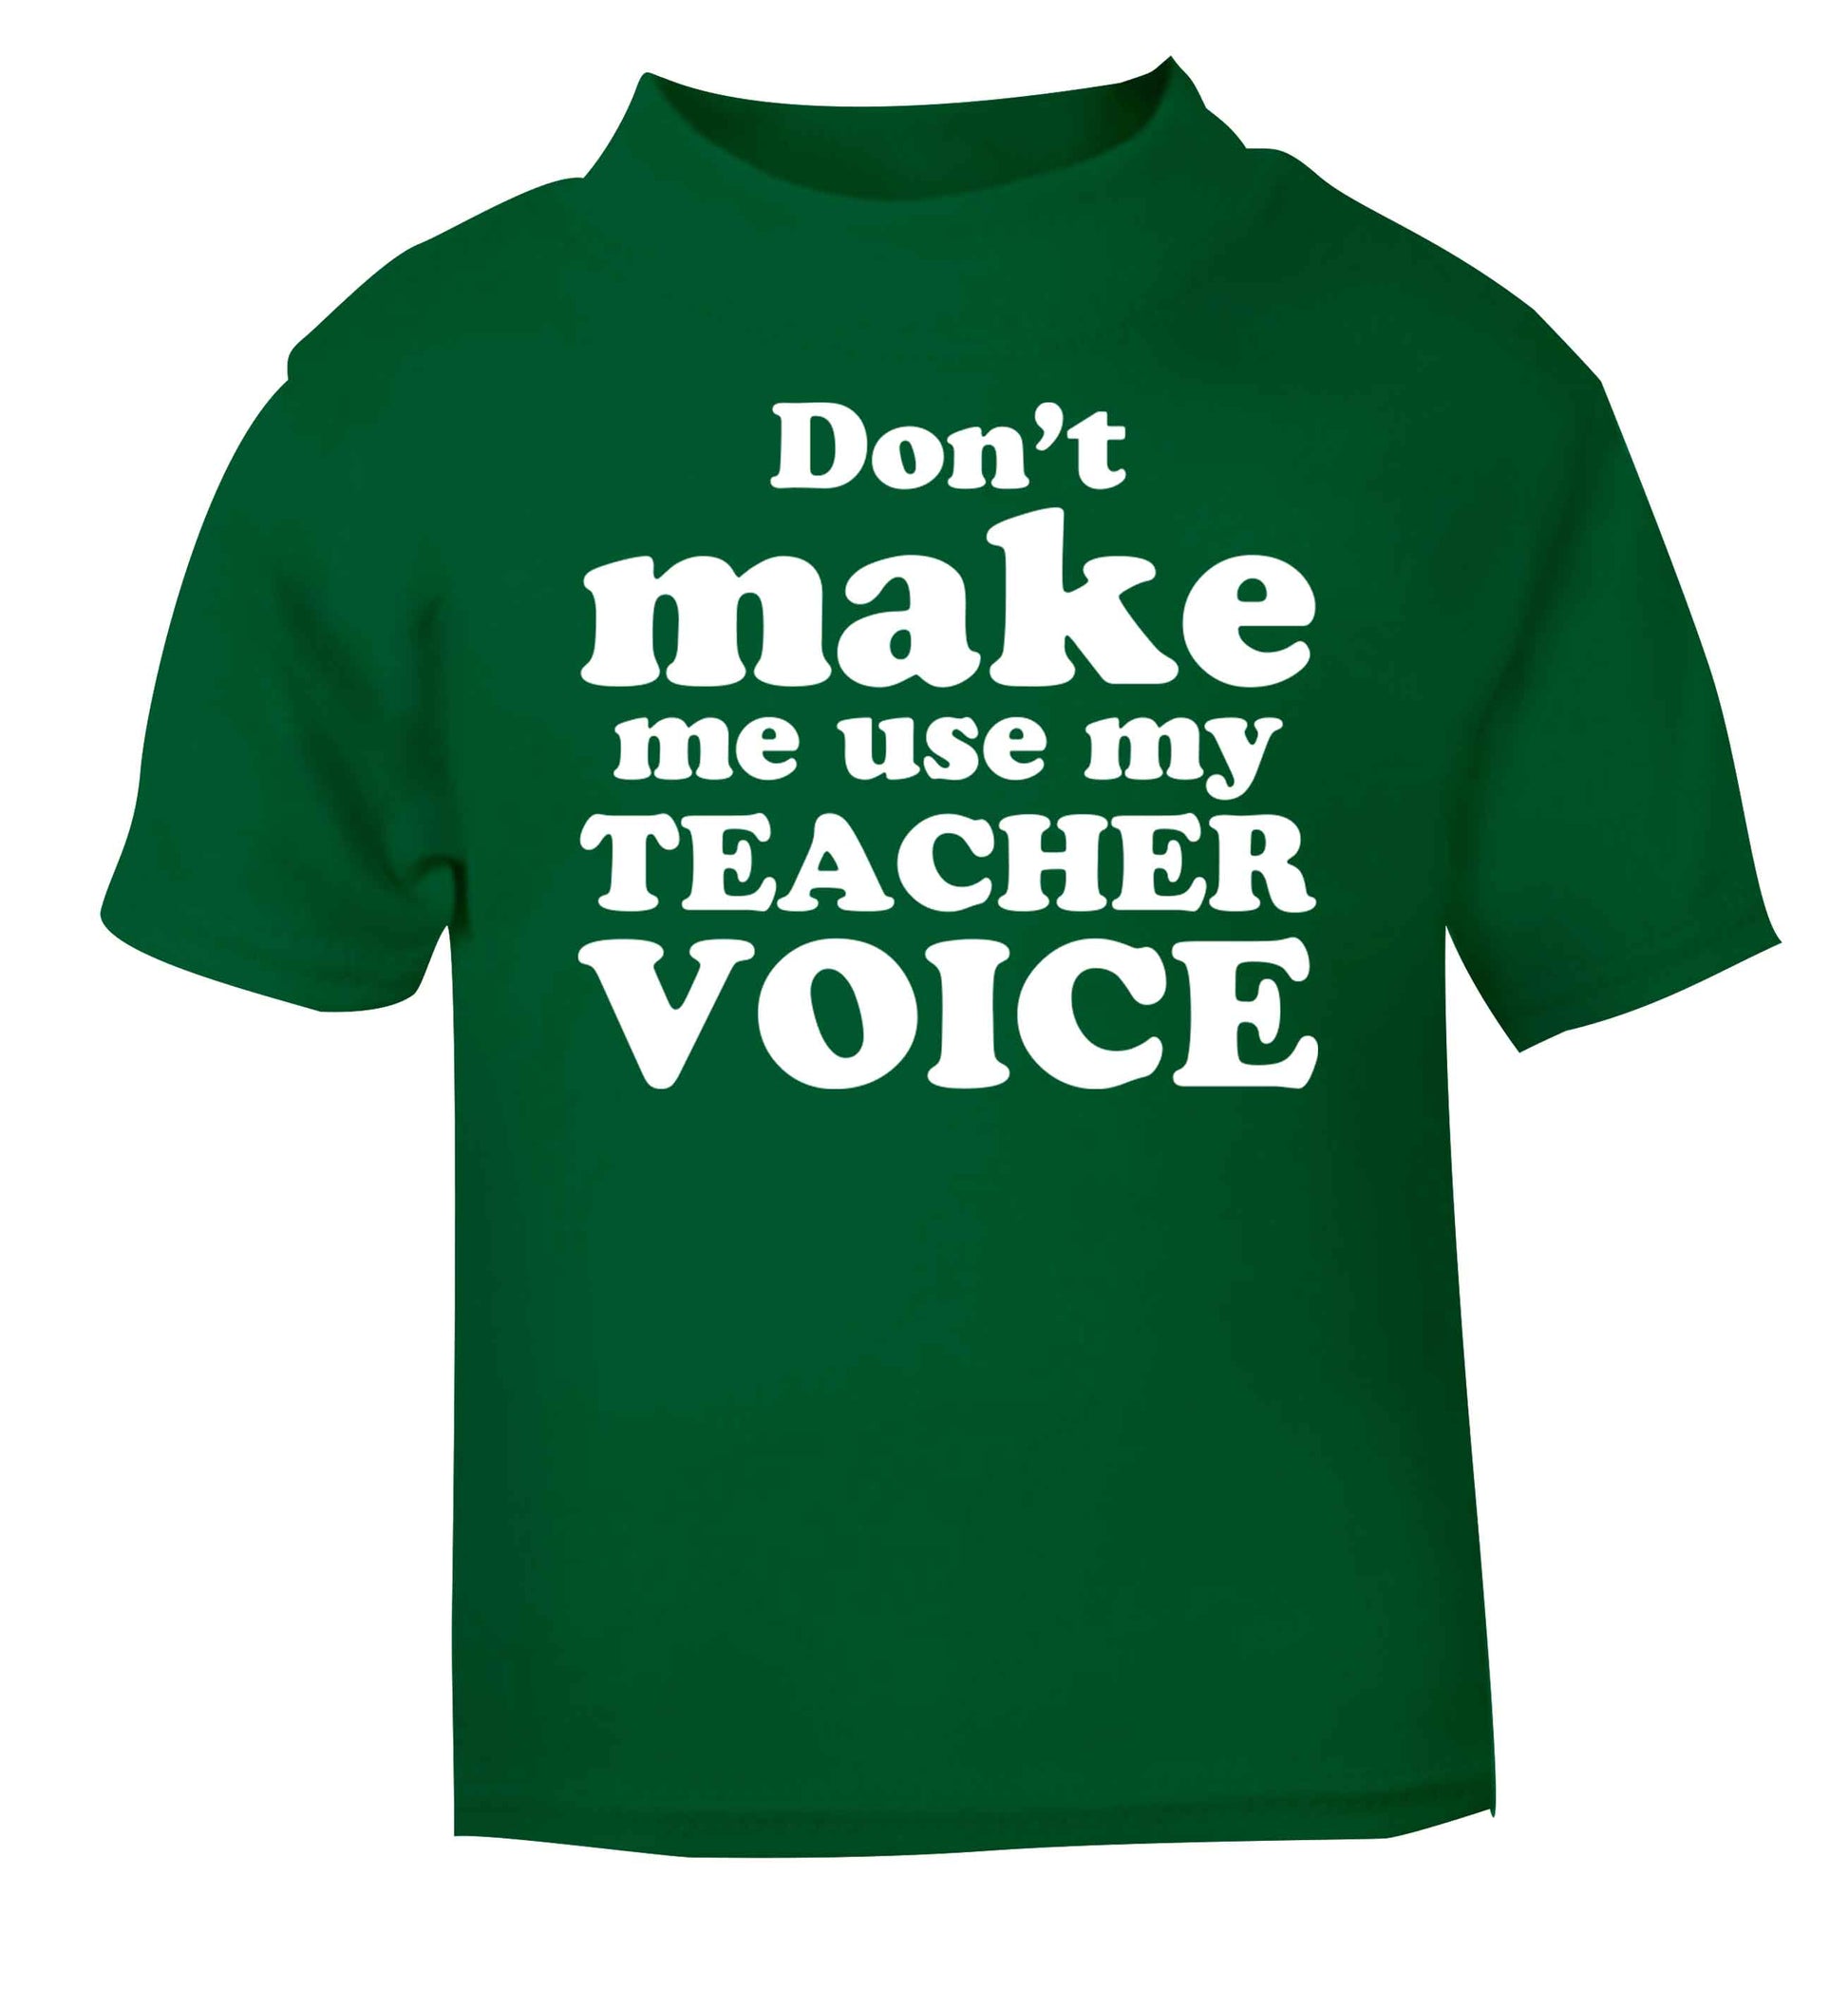 Don't make me use my teacher voice green baby toddler Tshirt 2 Years